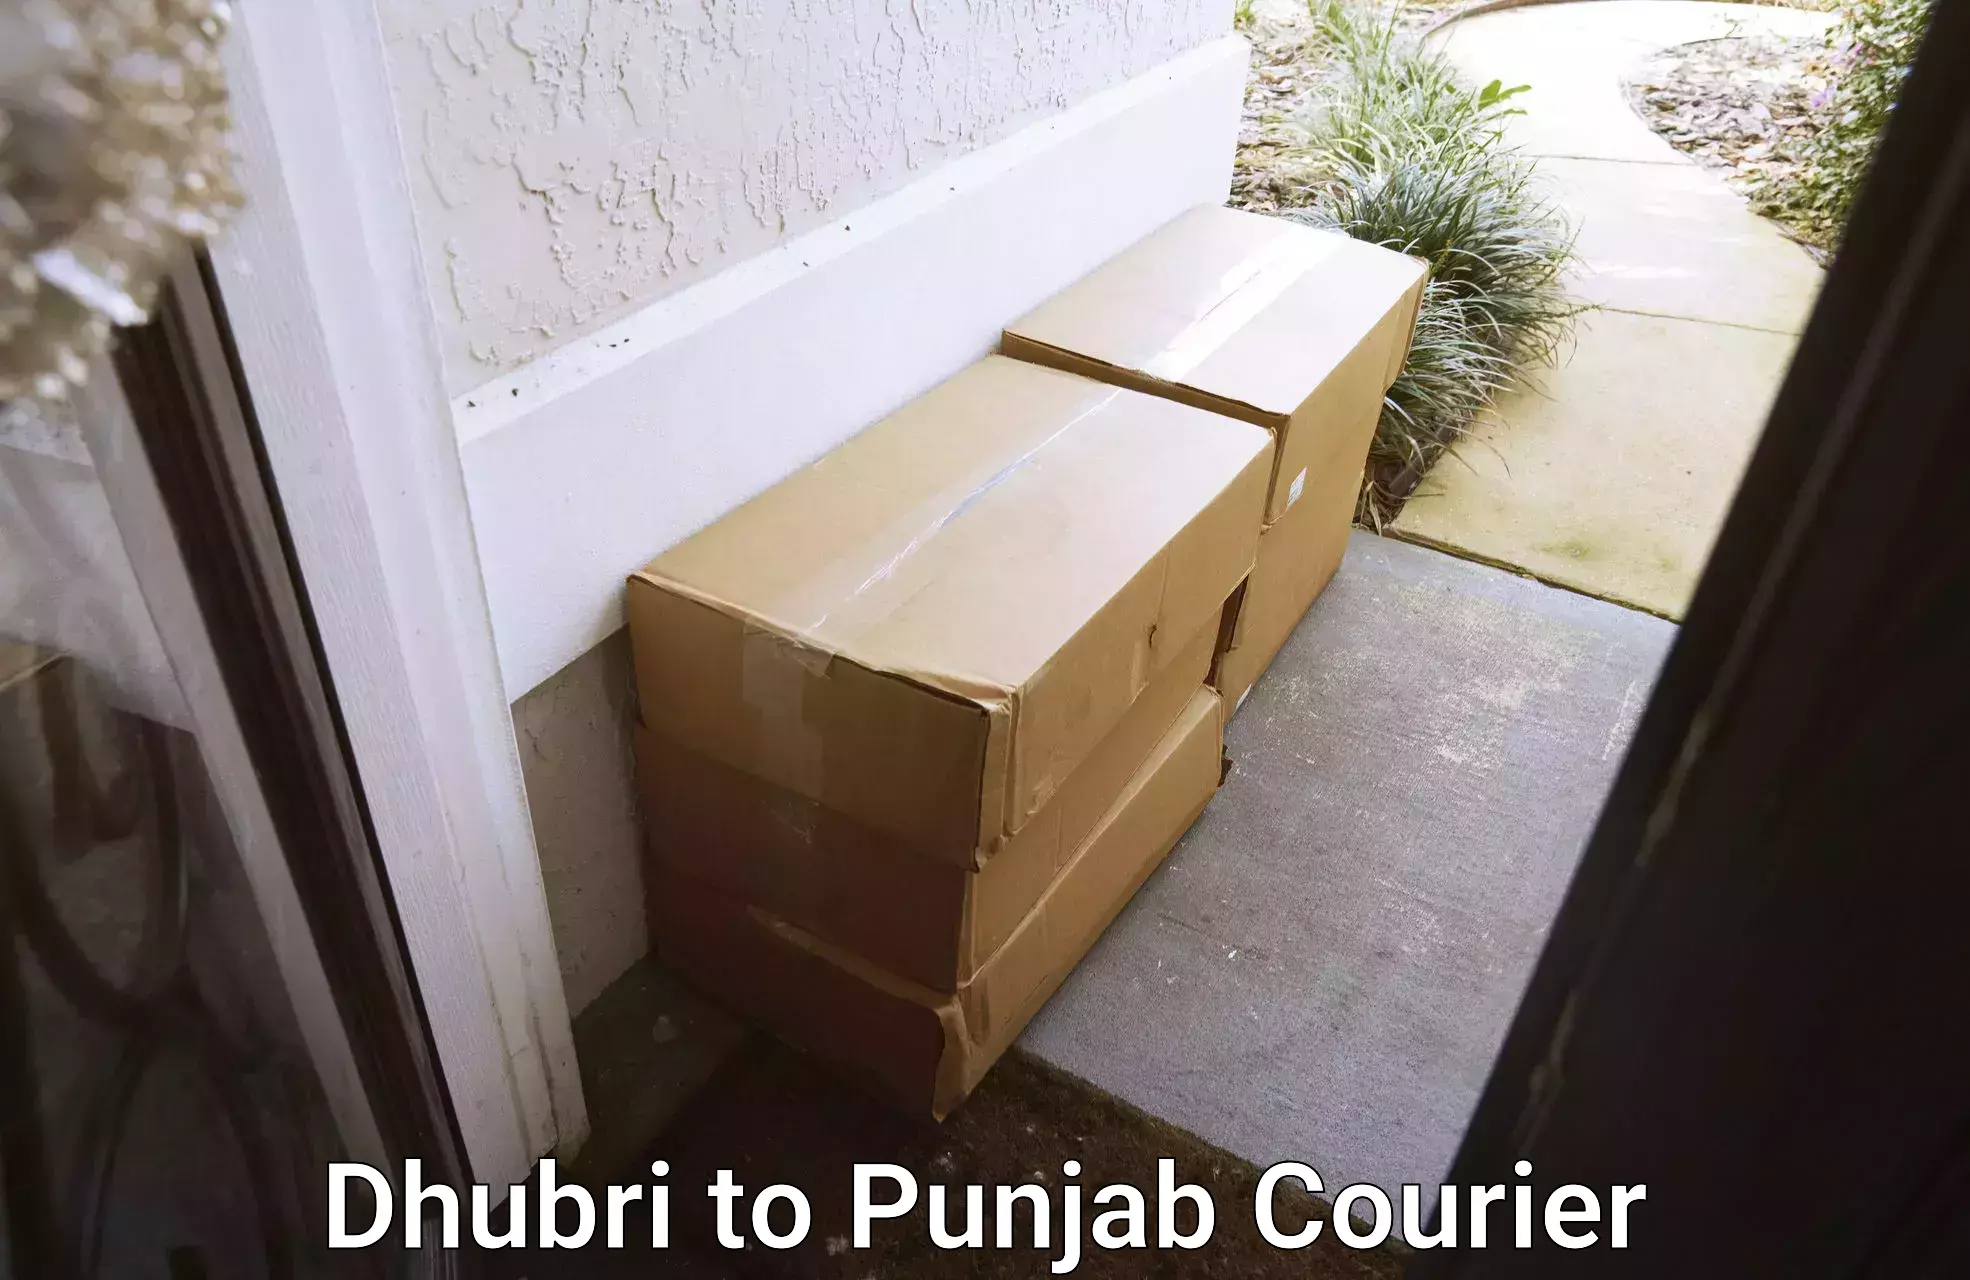 User-friendly delivery service Dhubri to Jhunir